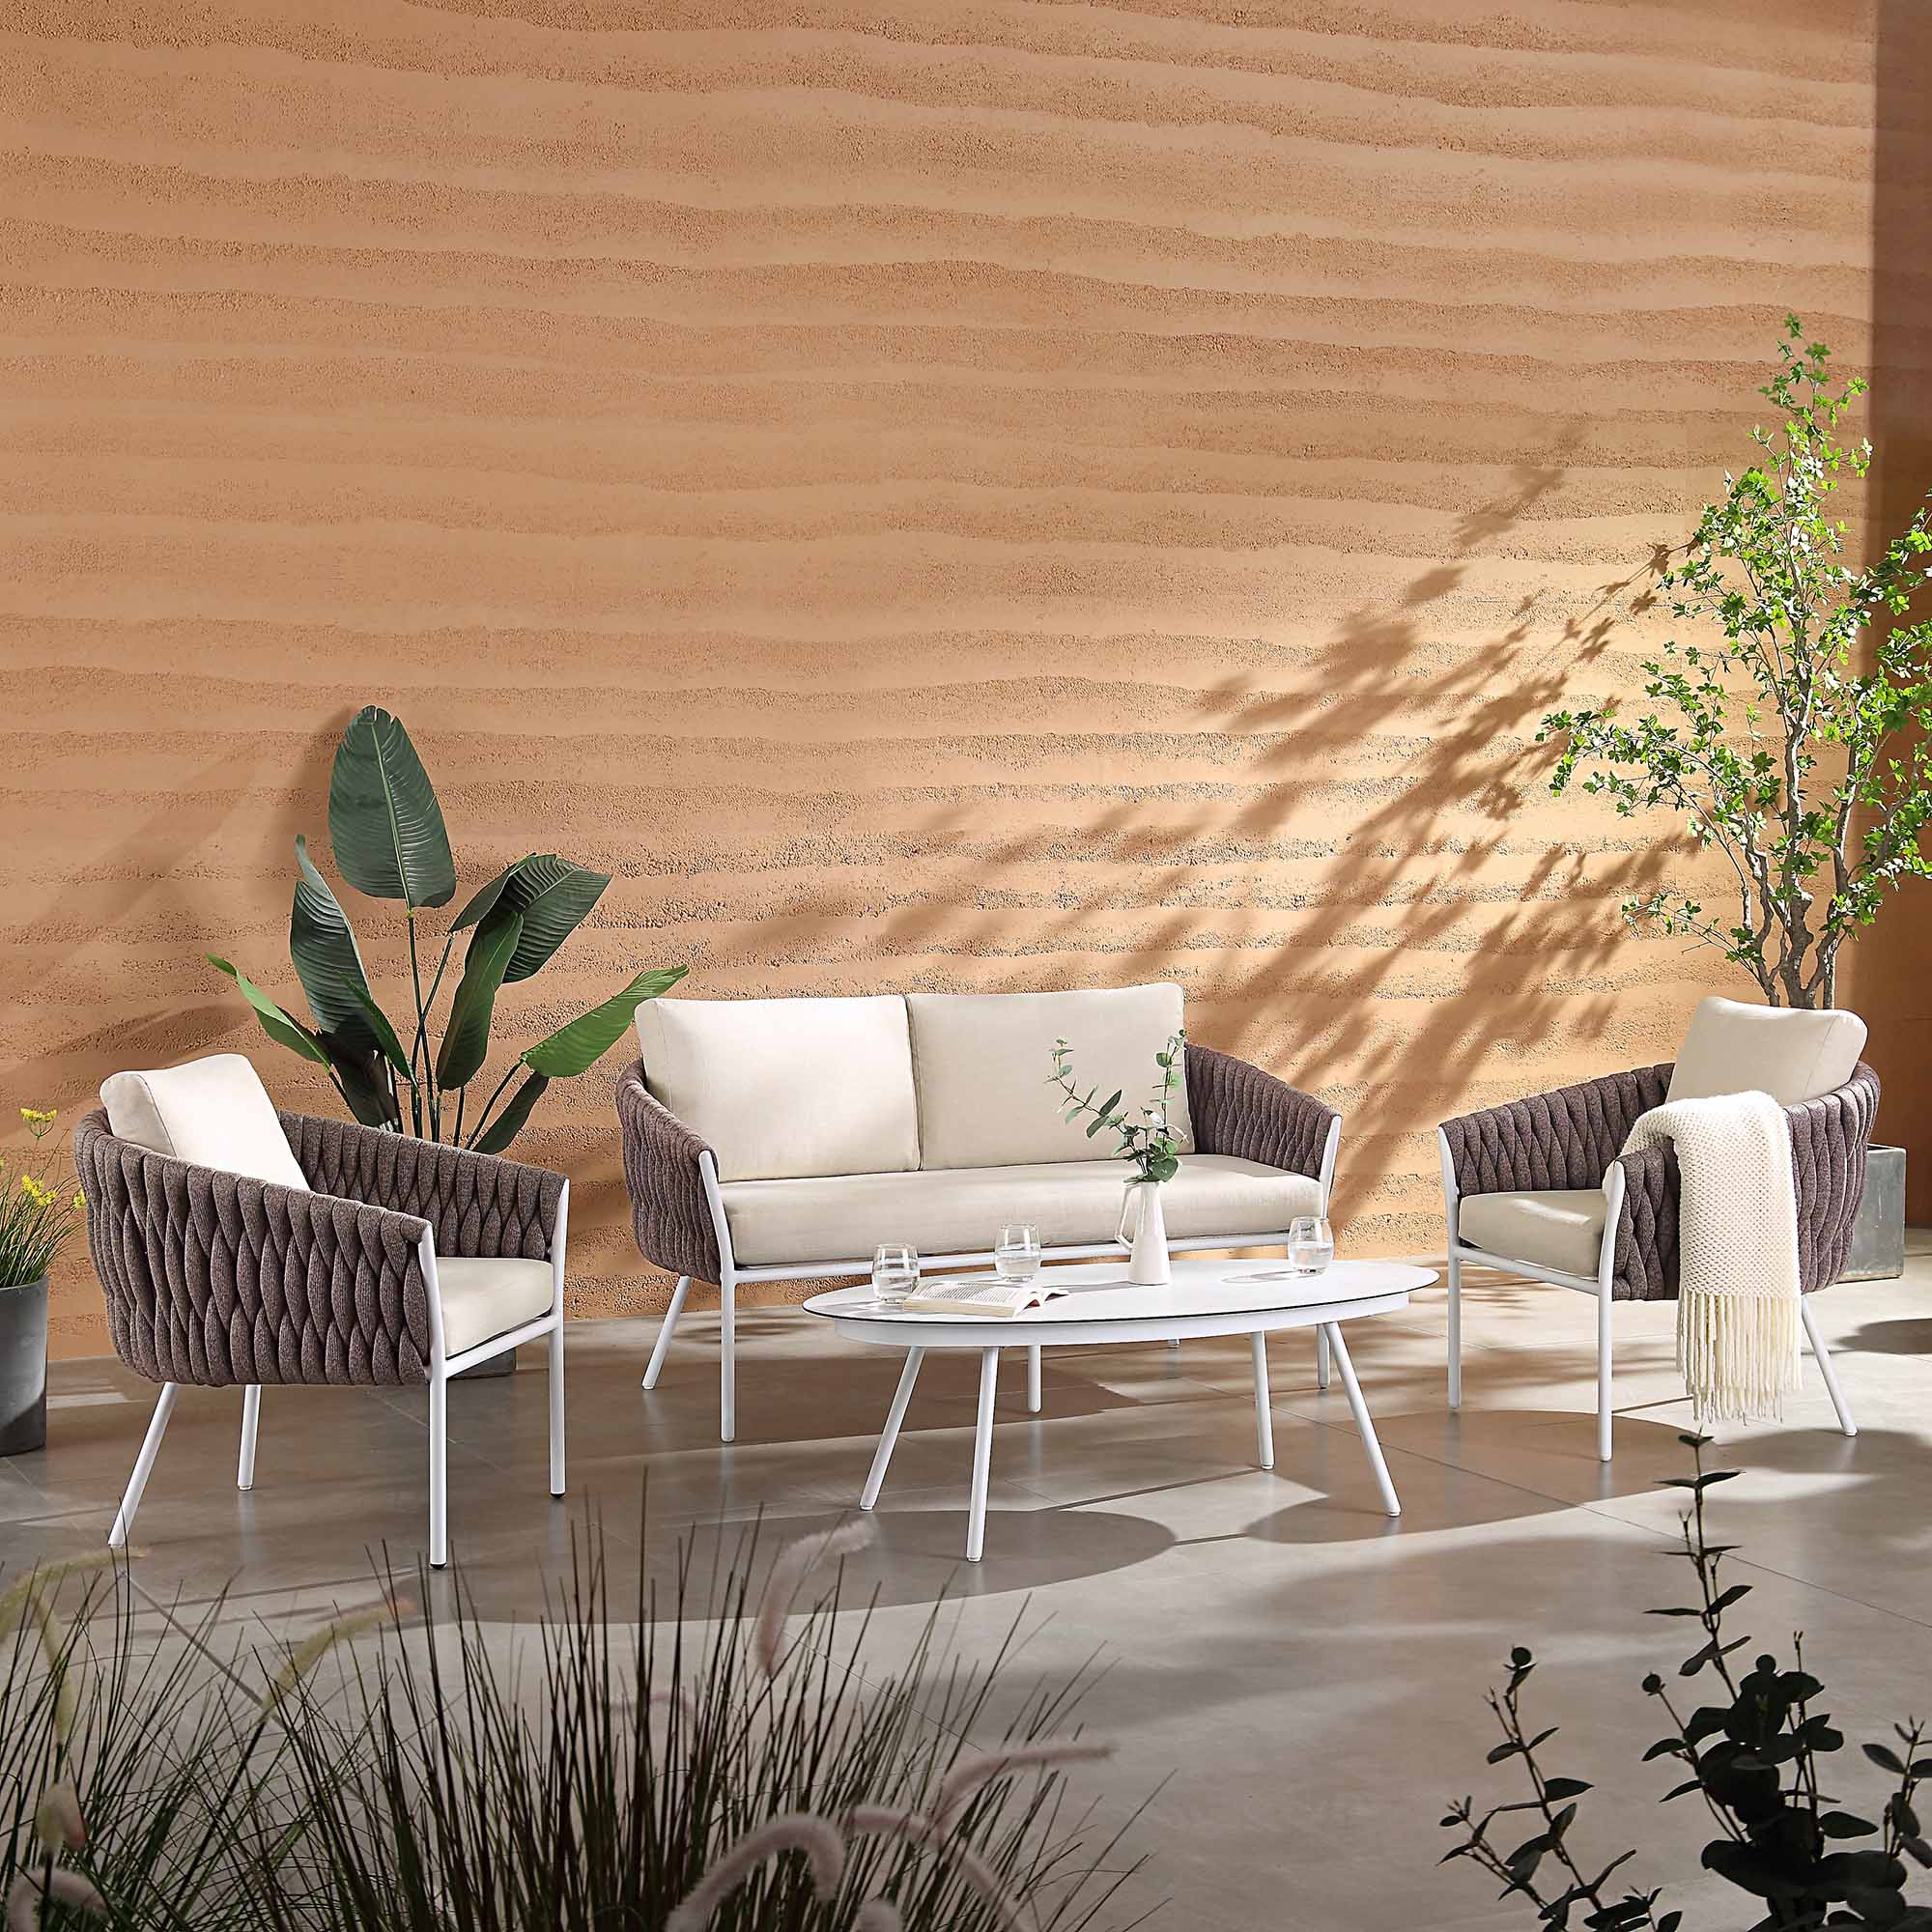 Montebello 4-Seater Outdoor Taupe Rope and Aluminium Sofa Set with White Ceramic Coffee Table